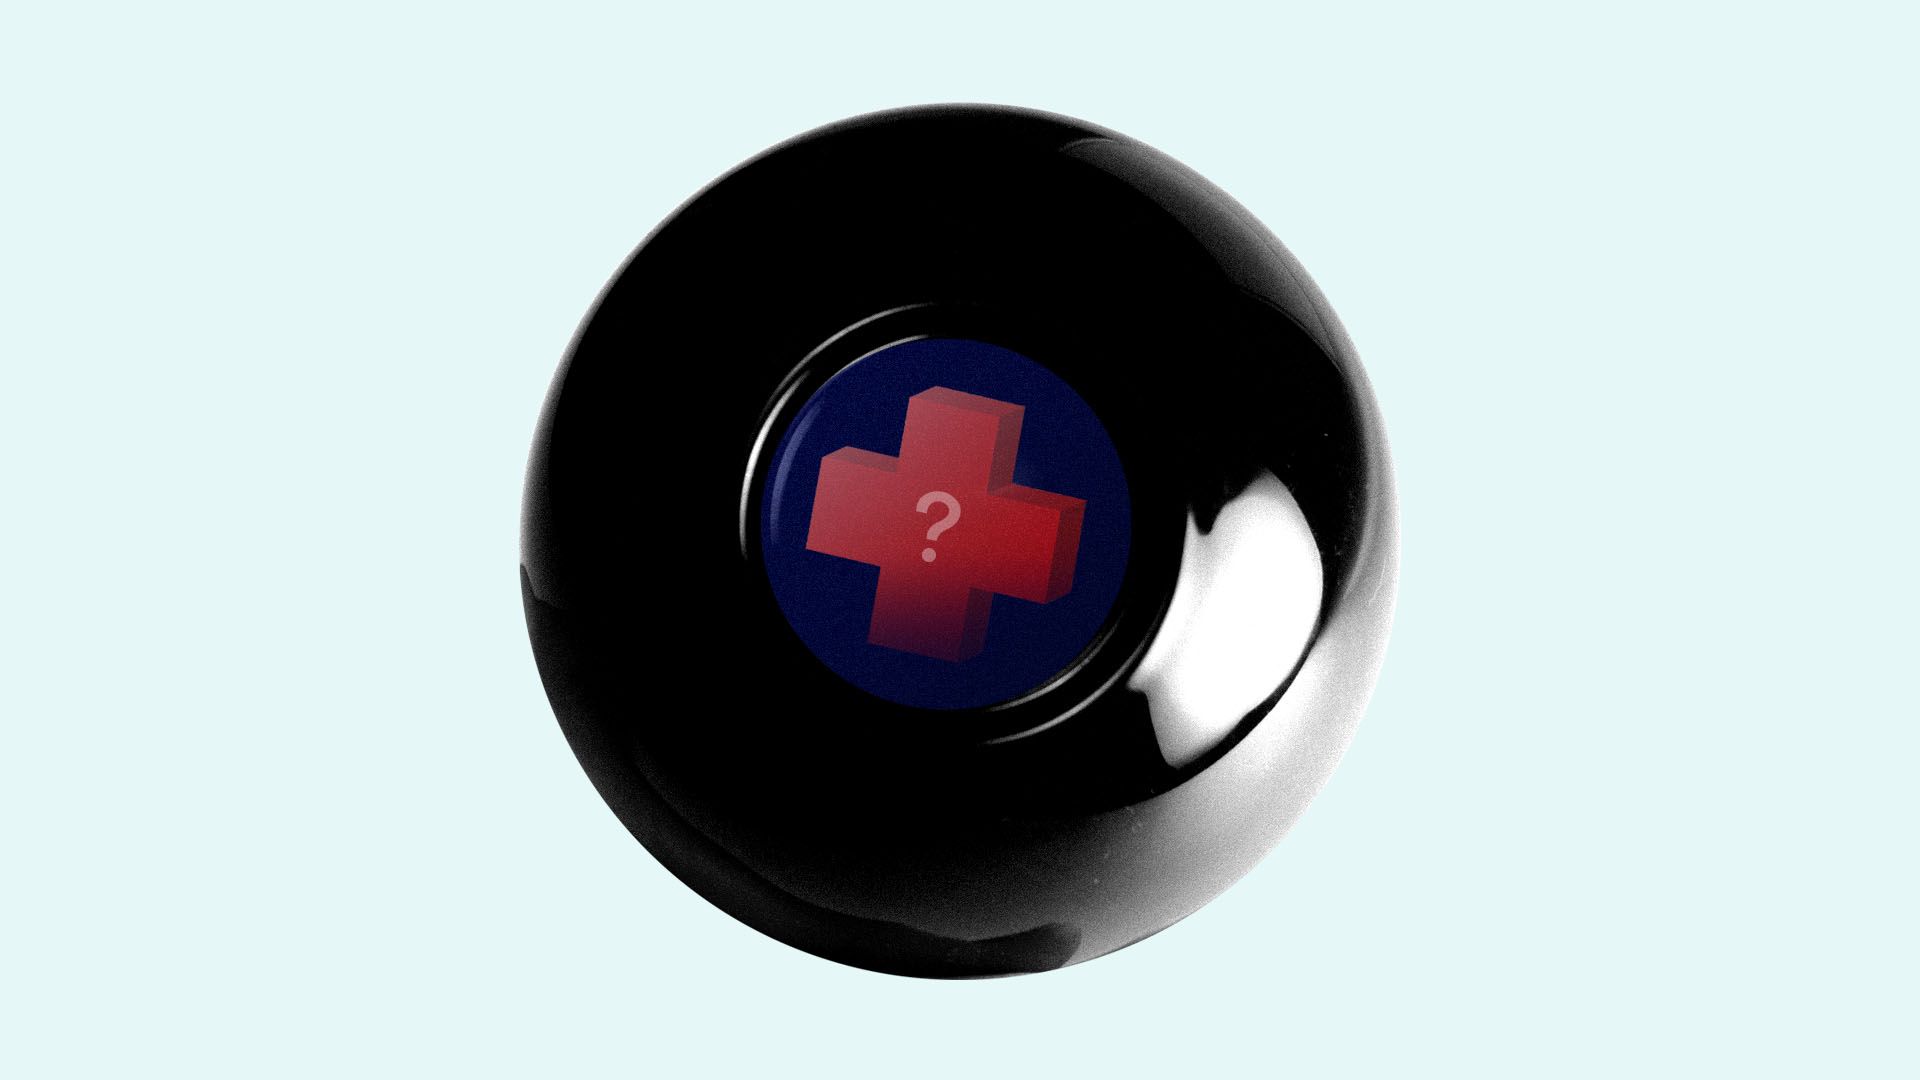 Illustration of Magic 8 Ball with a red cross symbol inside with a question mark on it